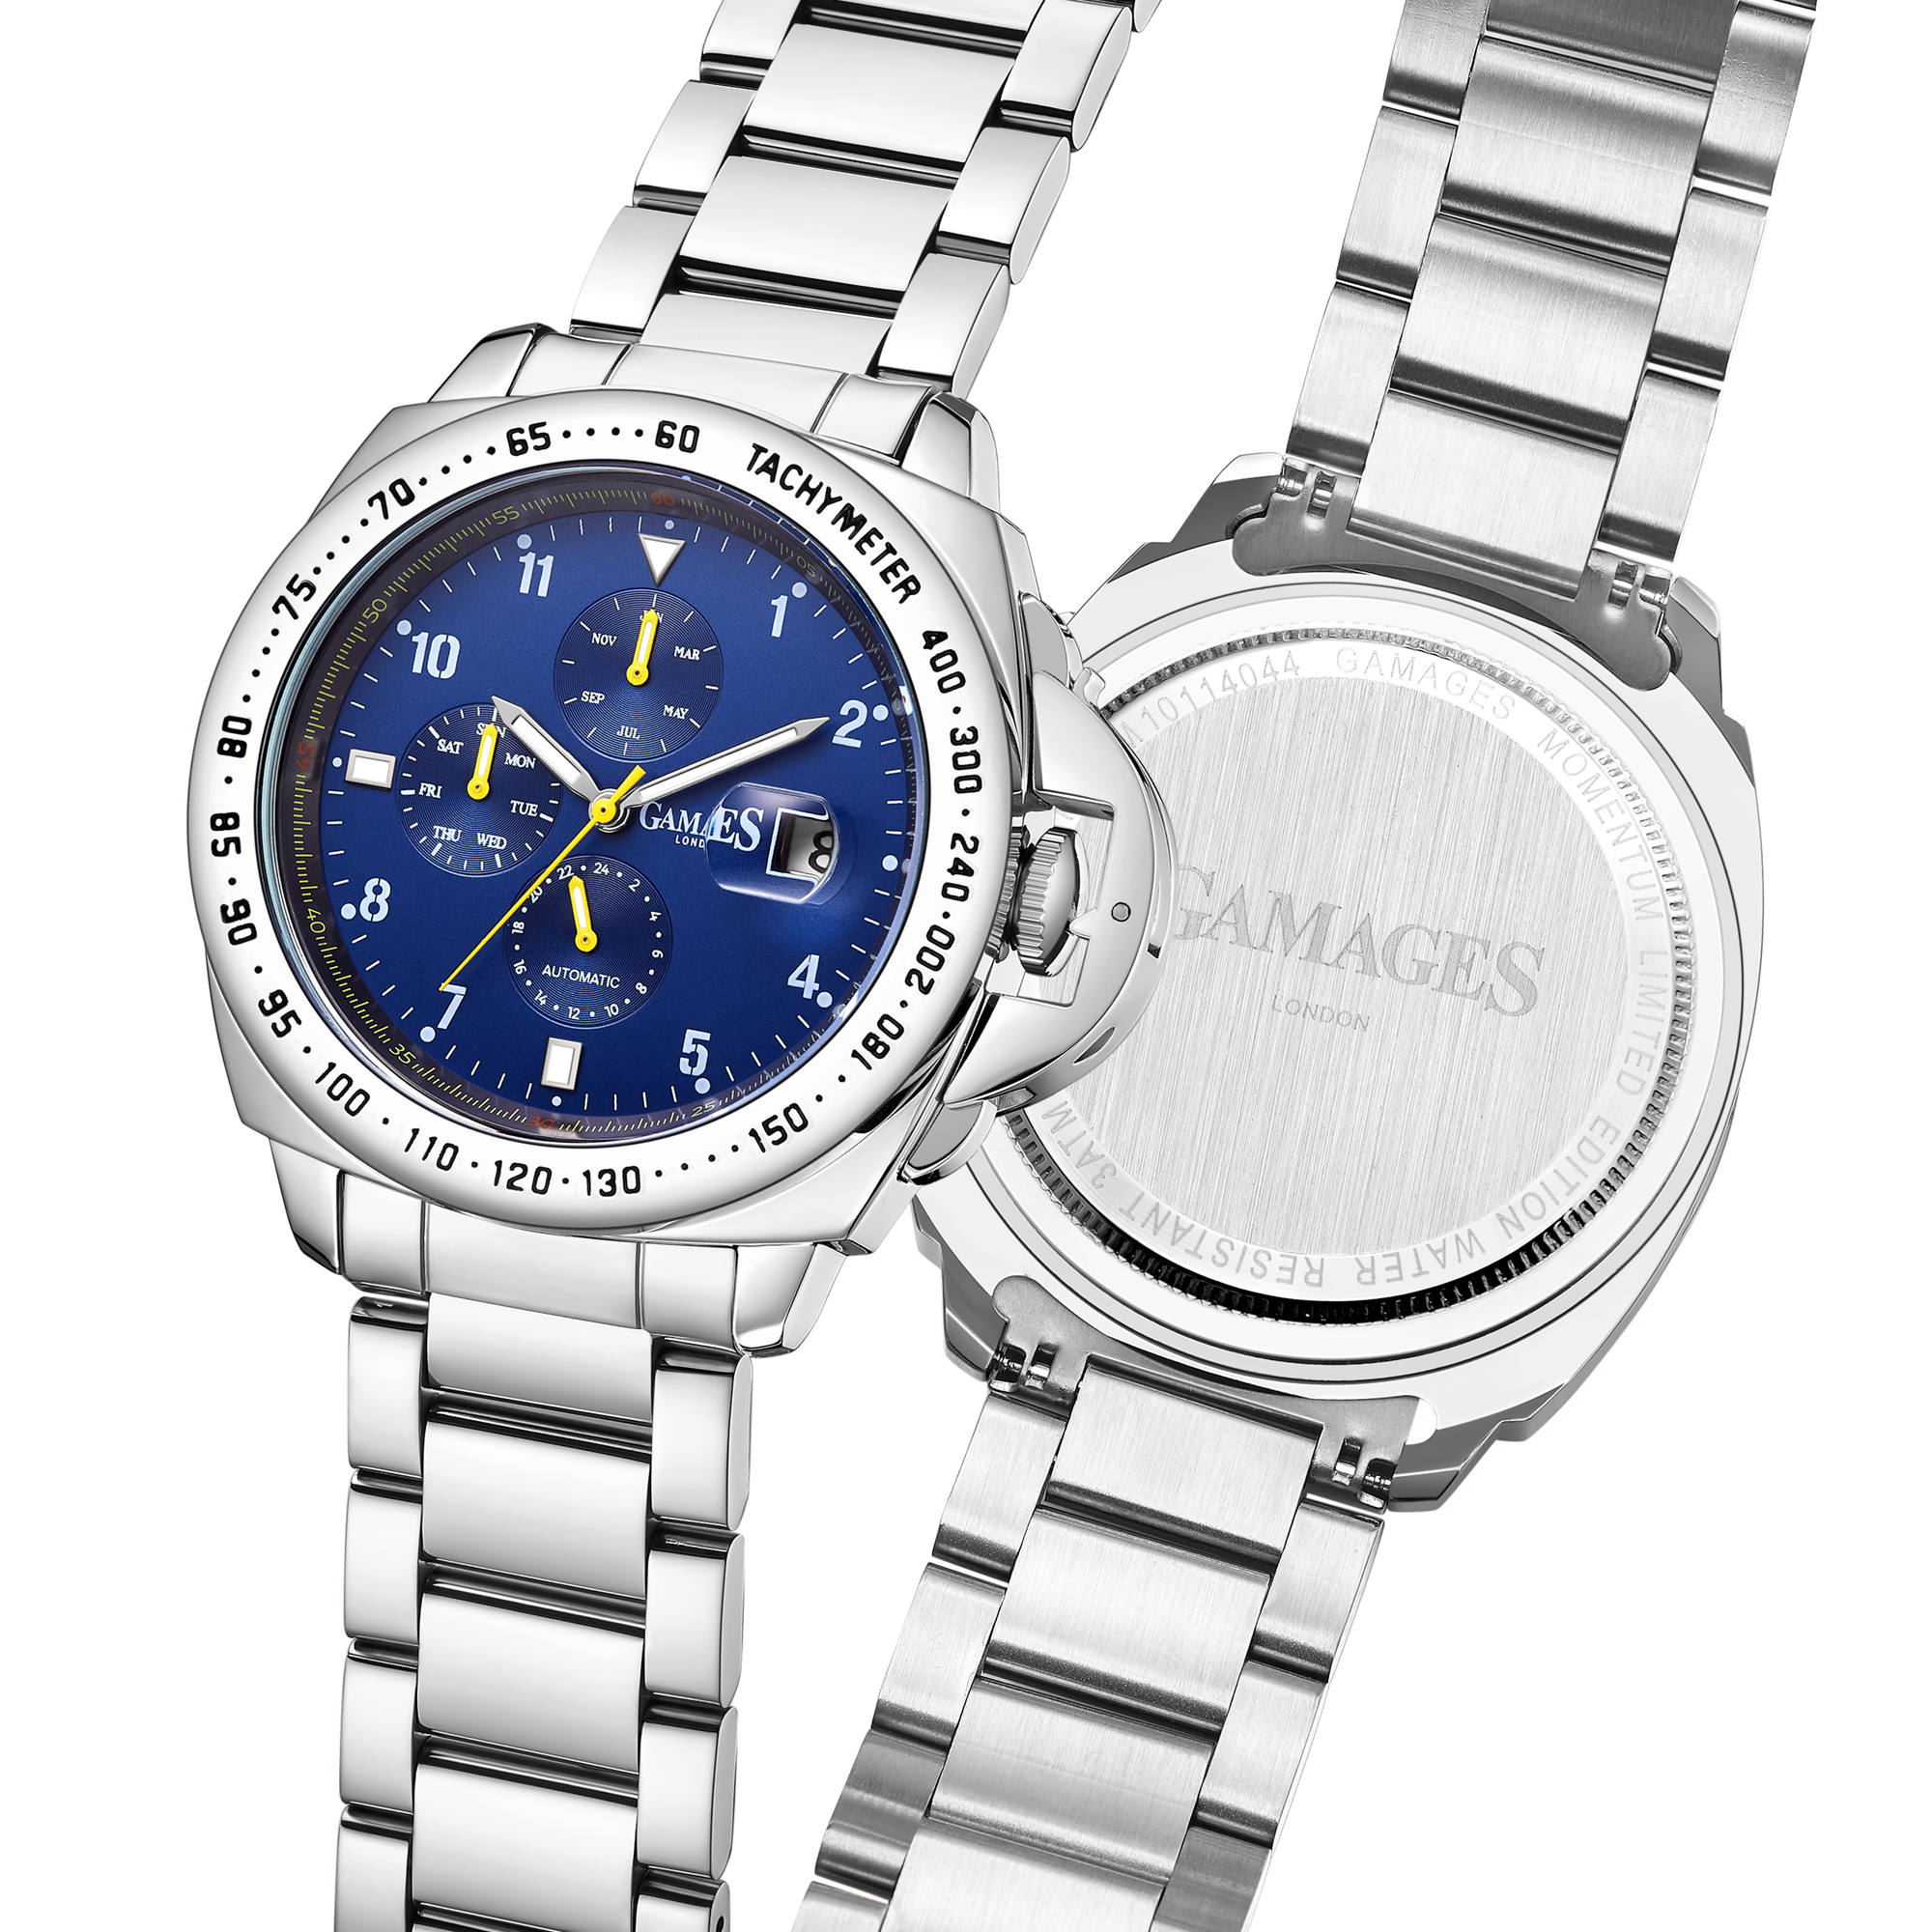 Gamages of London Hand Assembled Momentum Automatic Steel - 5 Year Warranty & Free Delivery